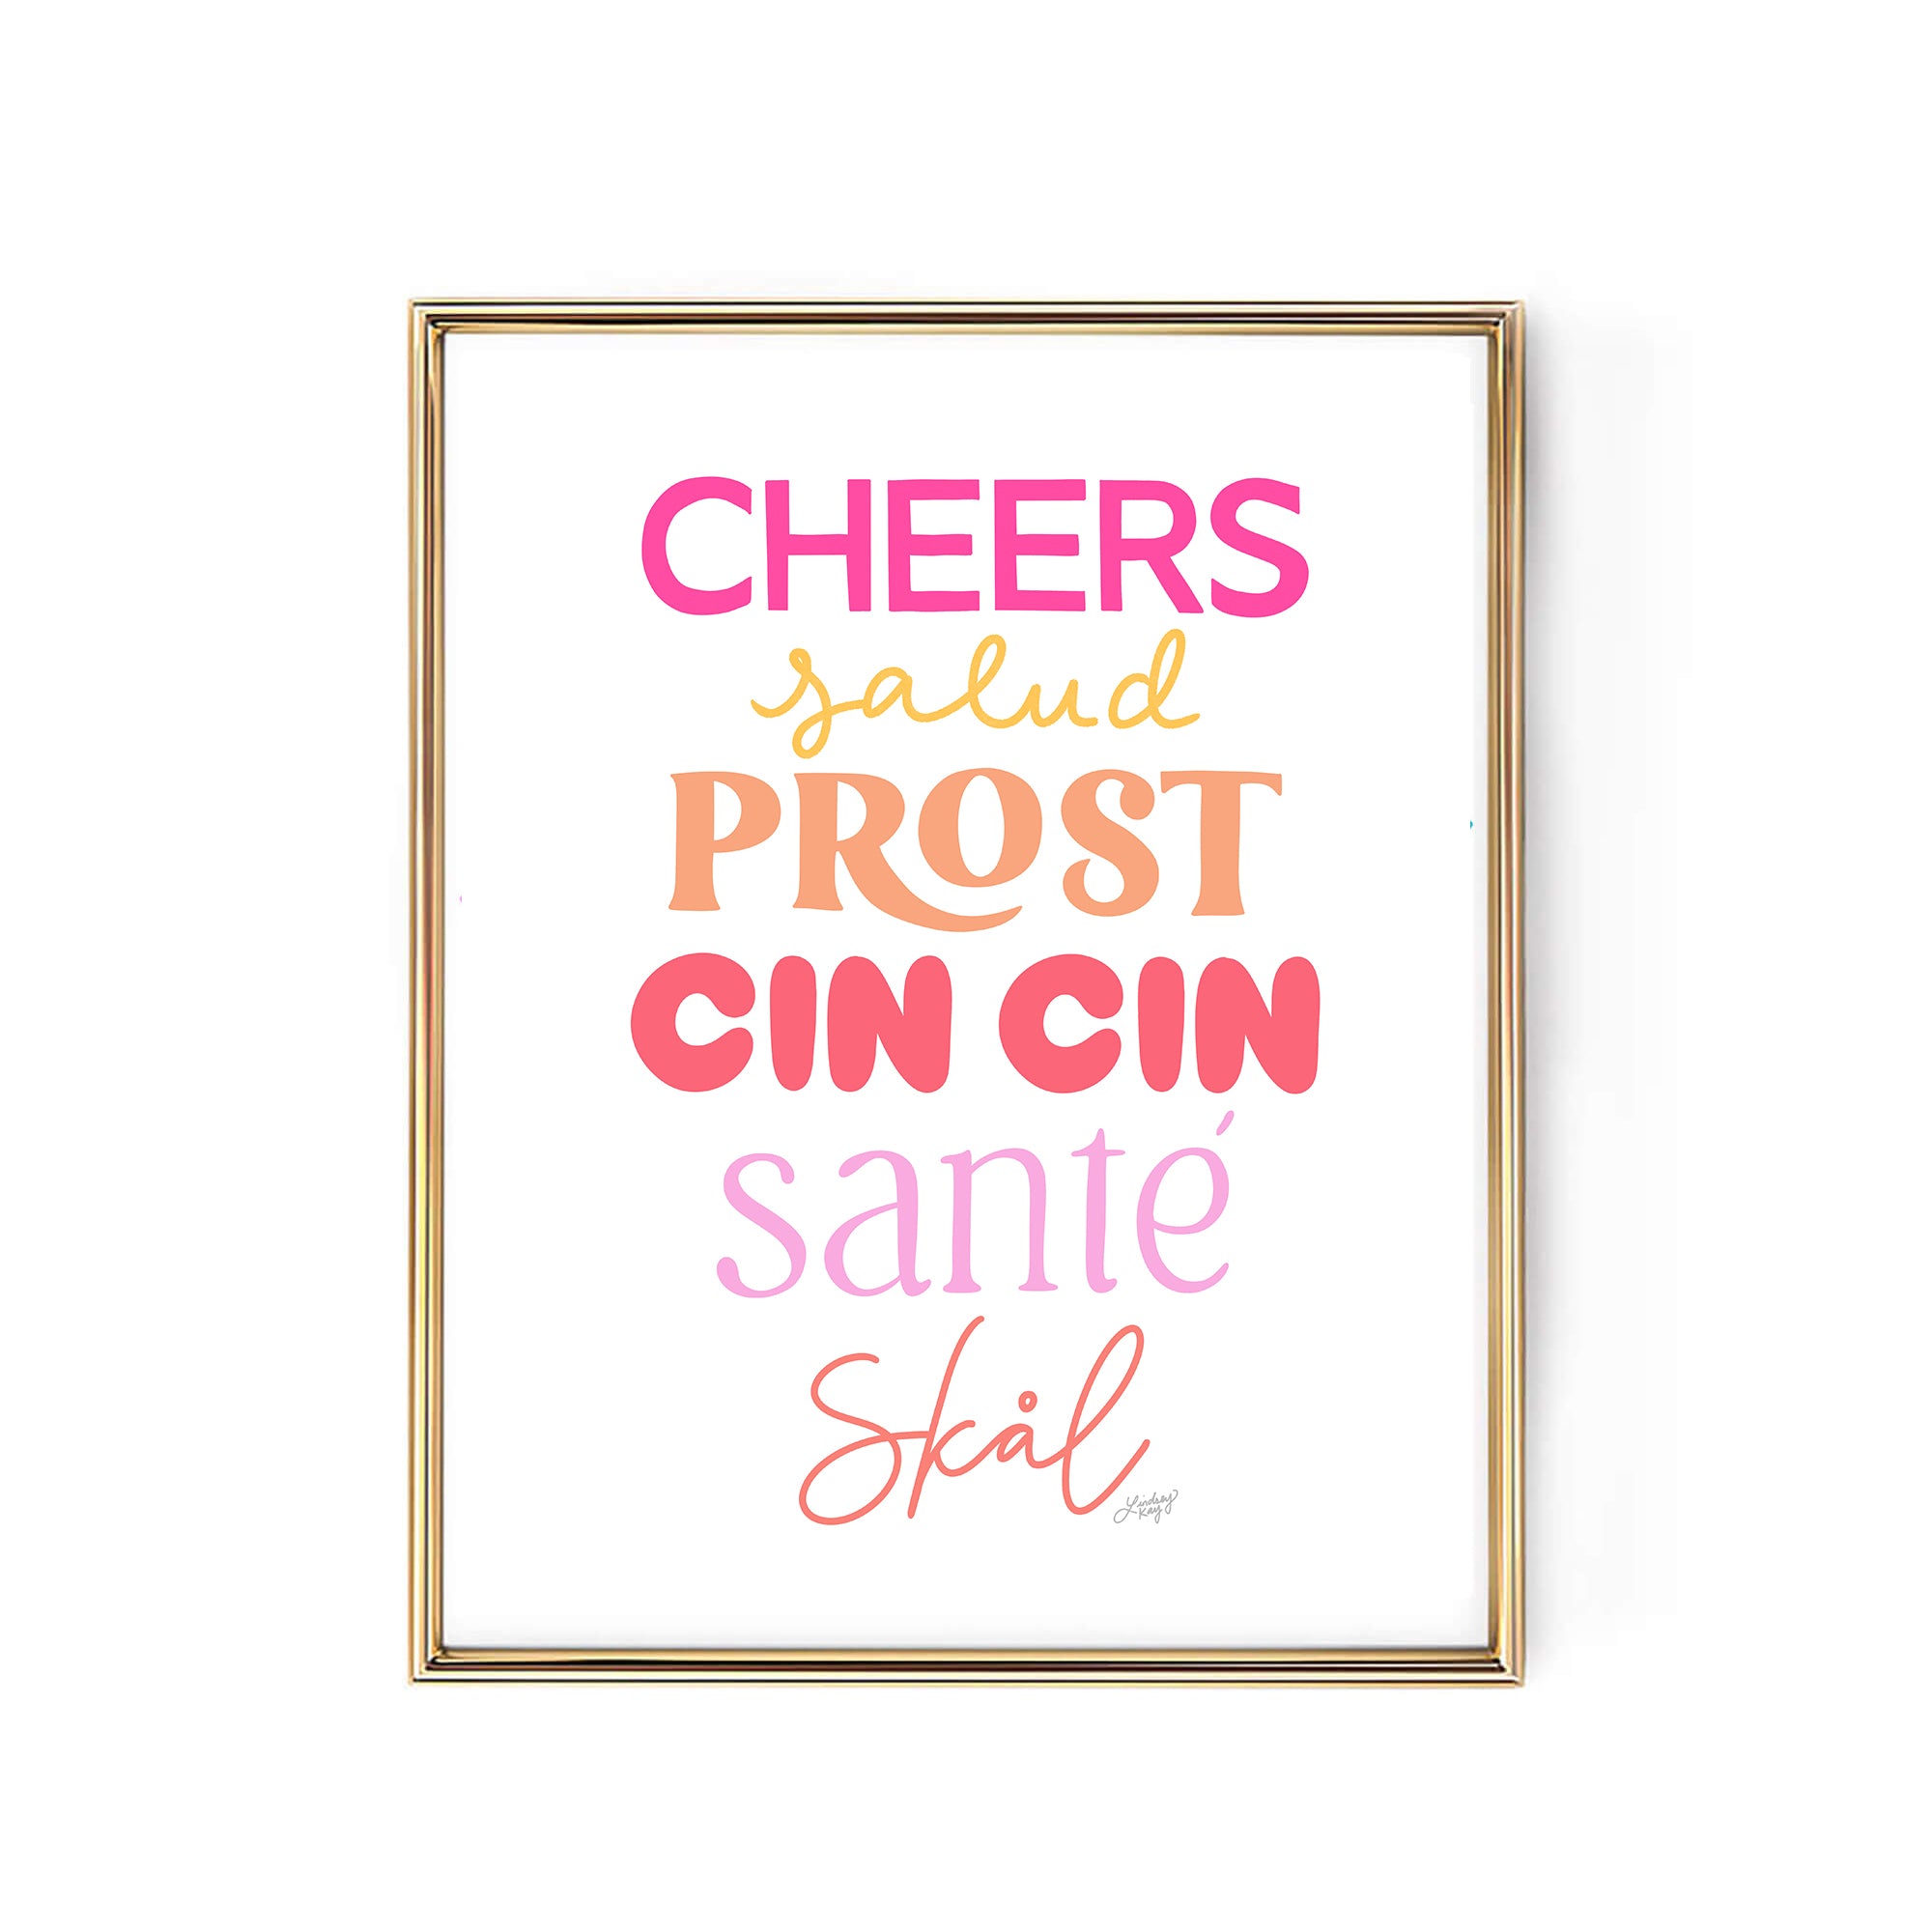 colorful pink cheers celebrate art-print print posted wall-art bar-cart-decor bar-cart art kitchen hand-lettering house-warming gift lindsey kay collective